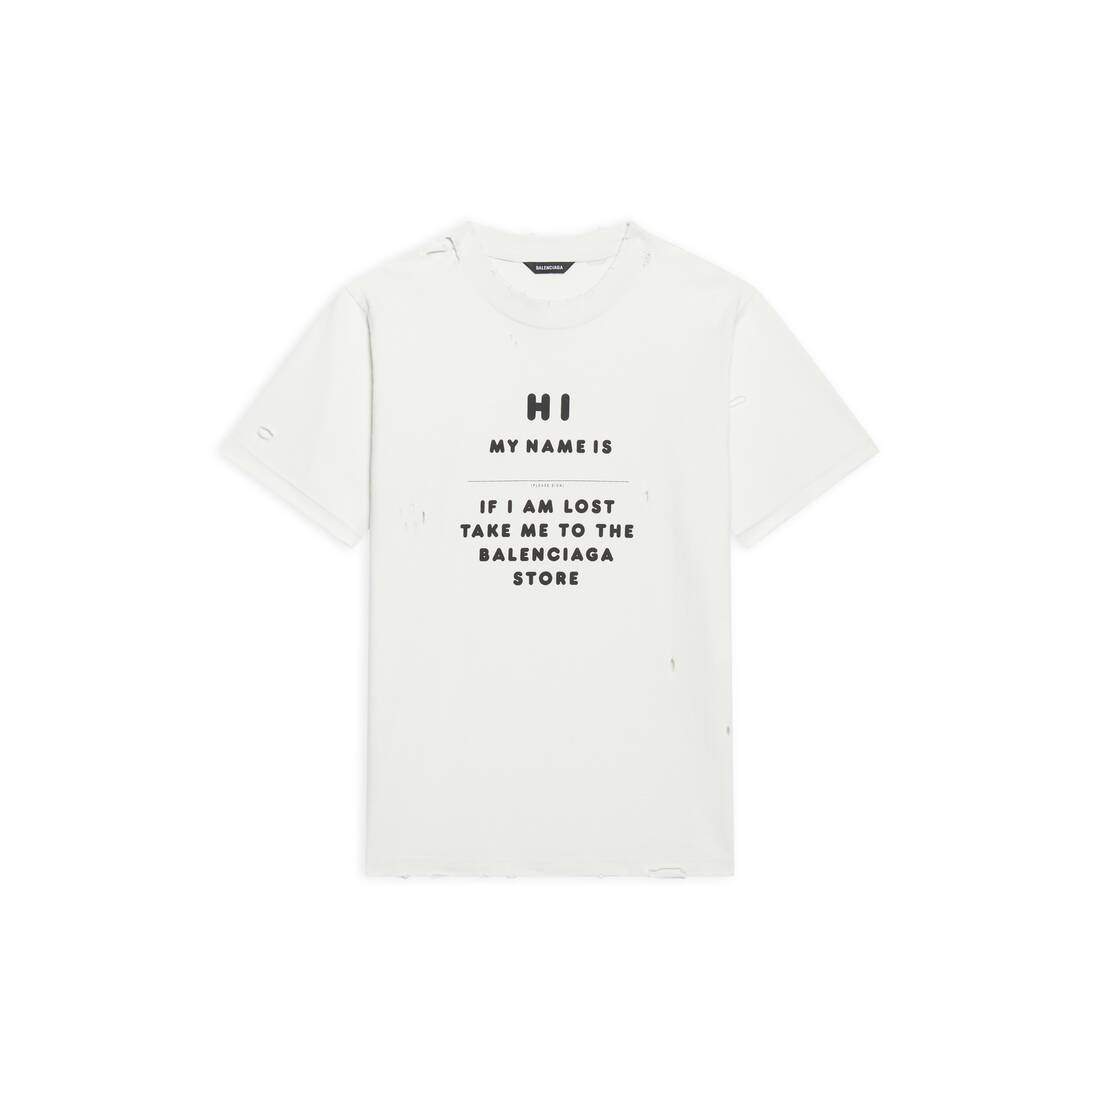 hi my name is small fit t-shirt